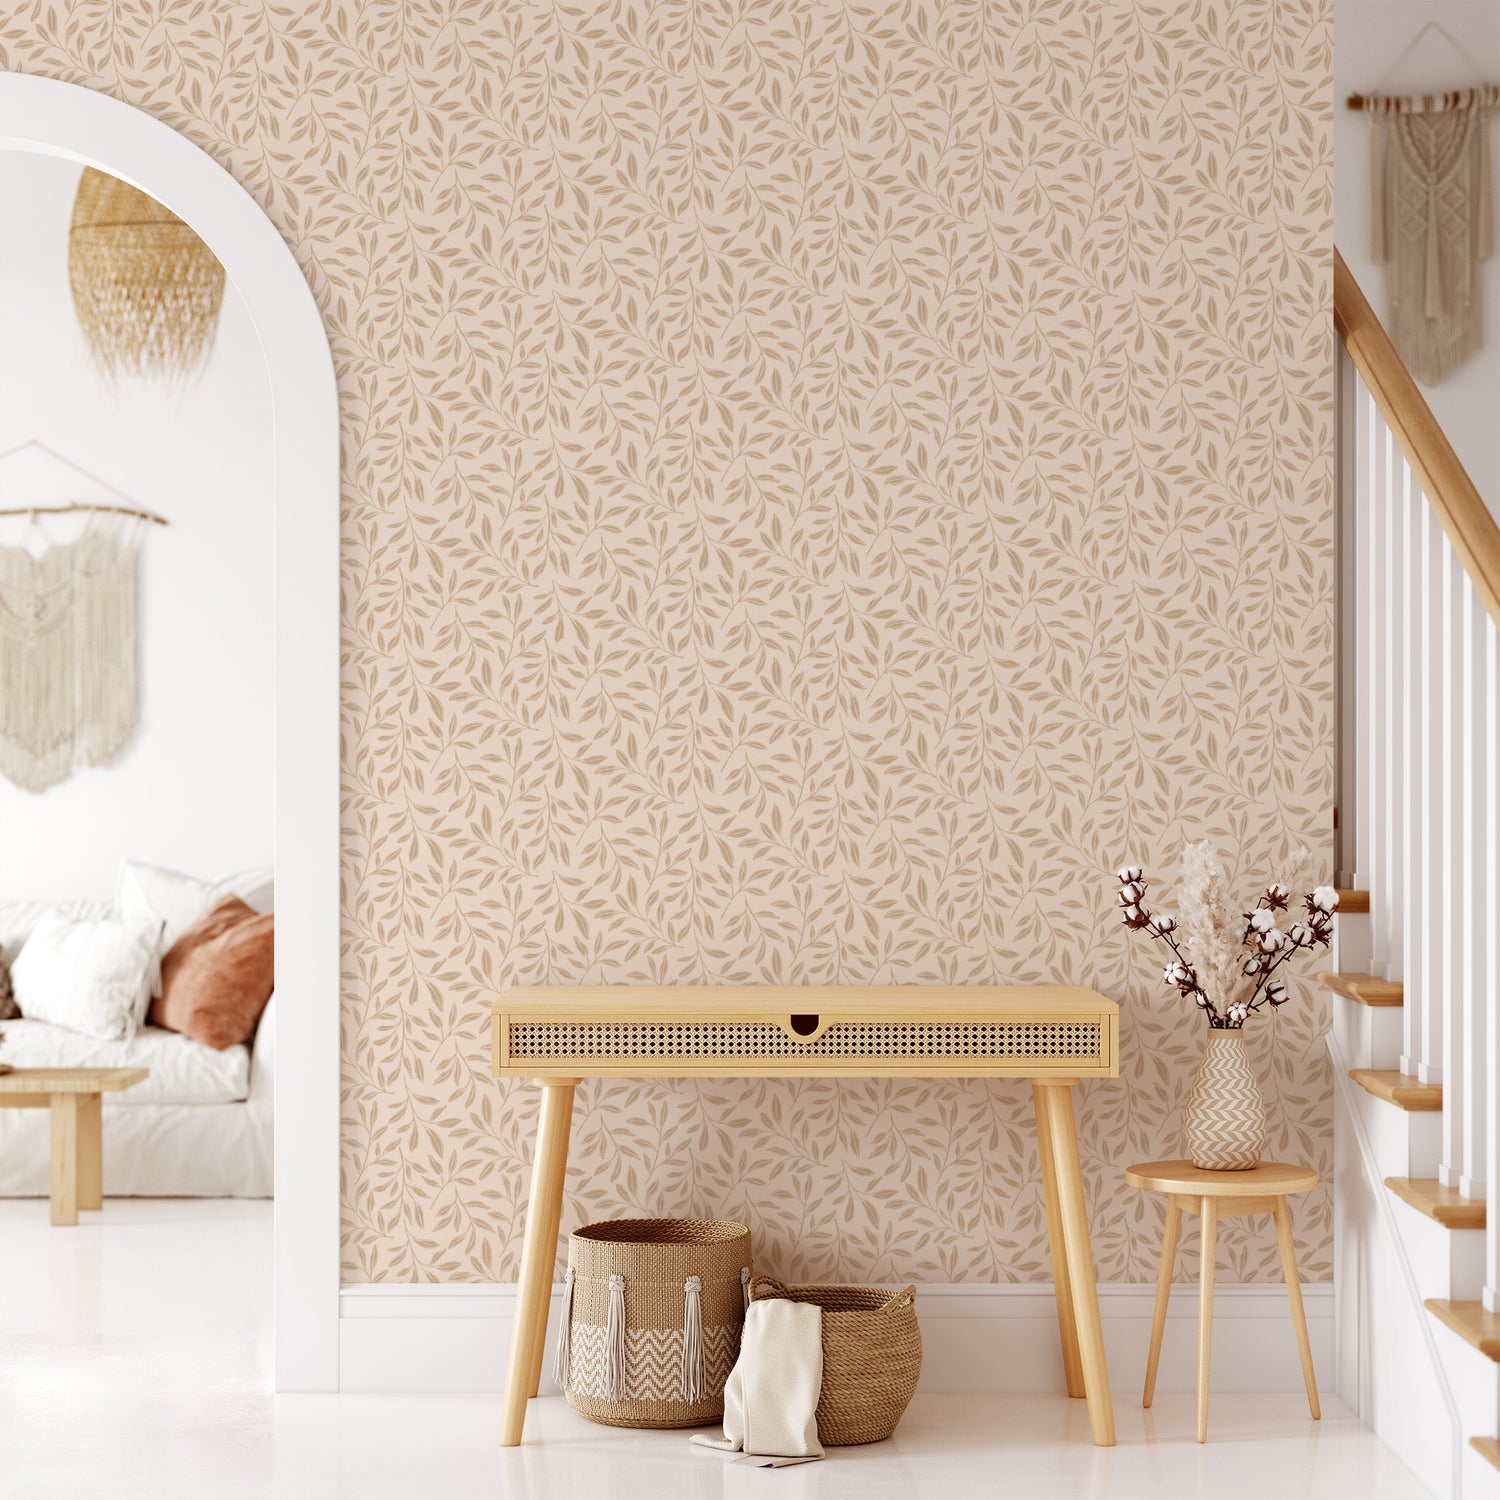 Bedroom featuring Cayla Naylor Willow-Dogwood Peel and Stick Wallpaper - a classic pattern